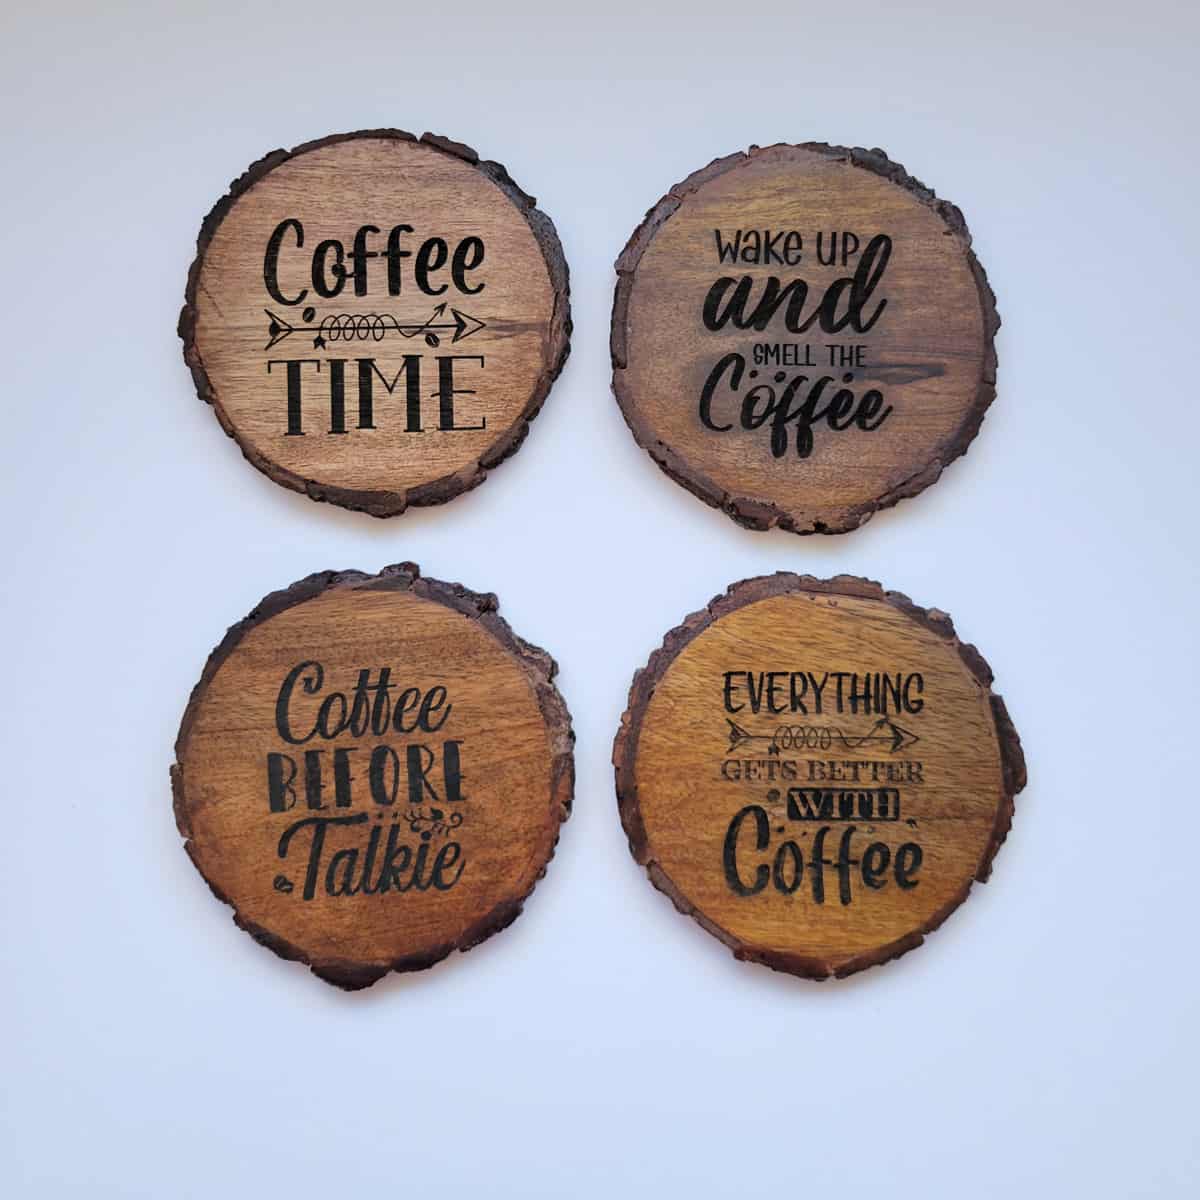 Four completed engraved wood coasters with various sayings about coffee.